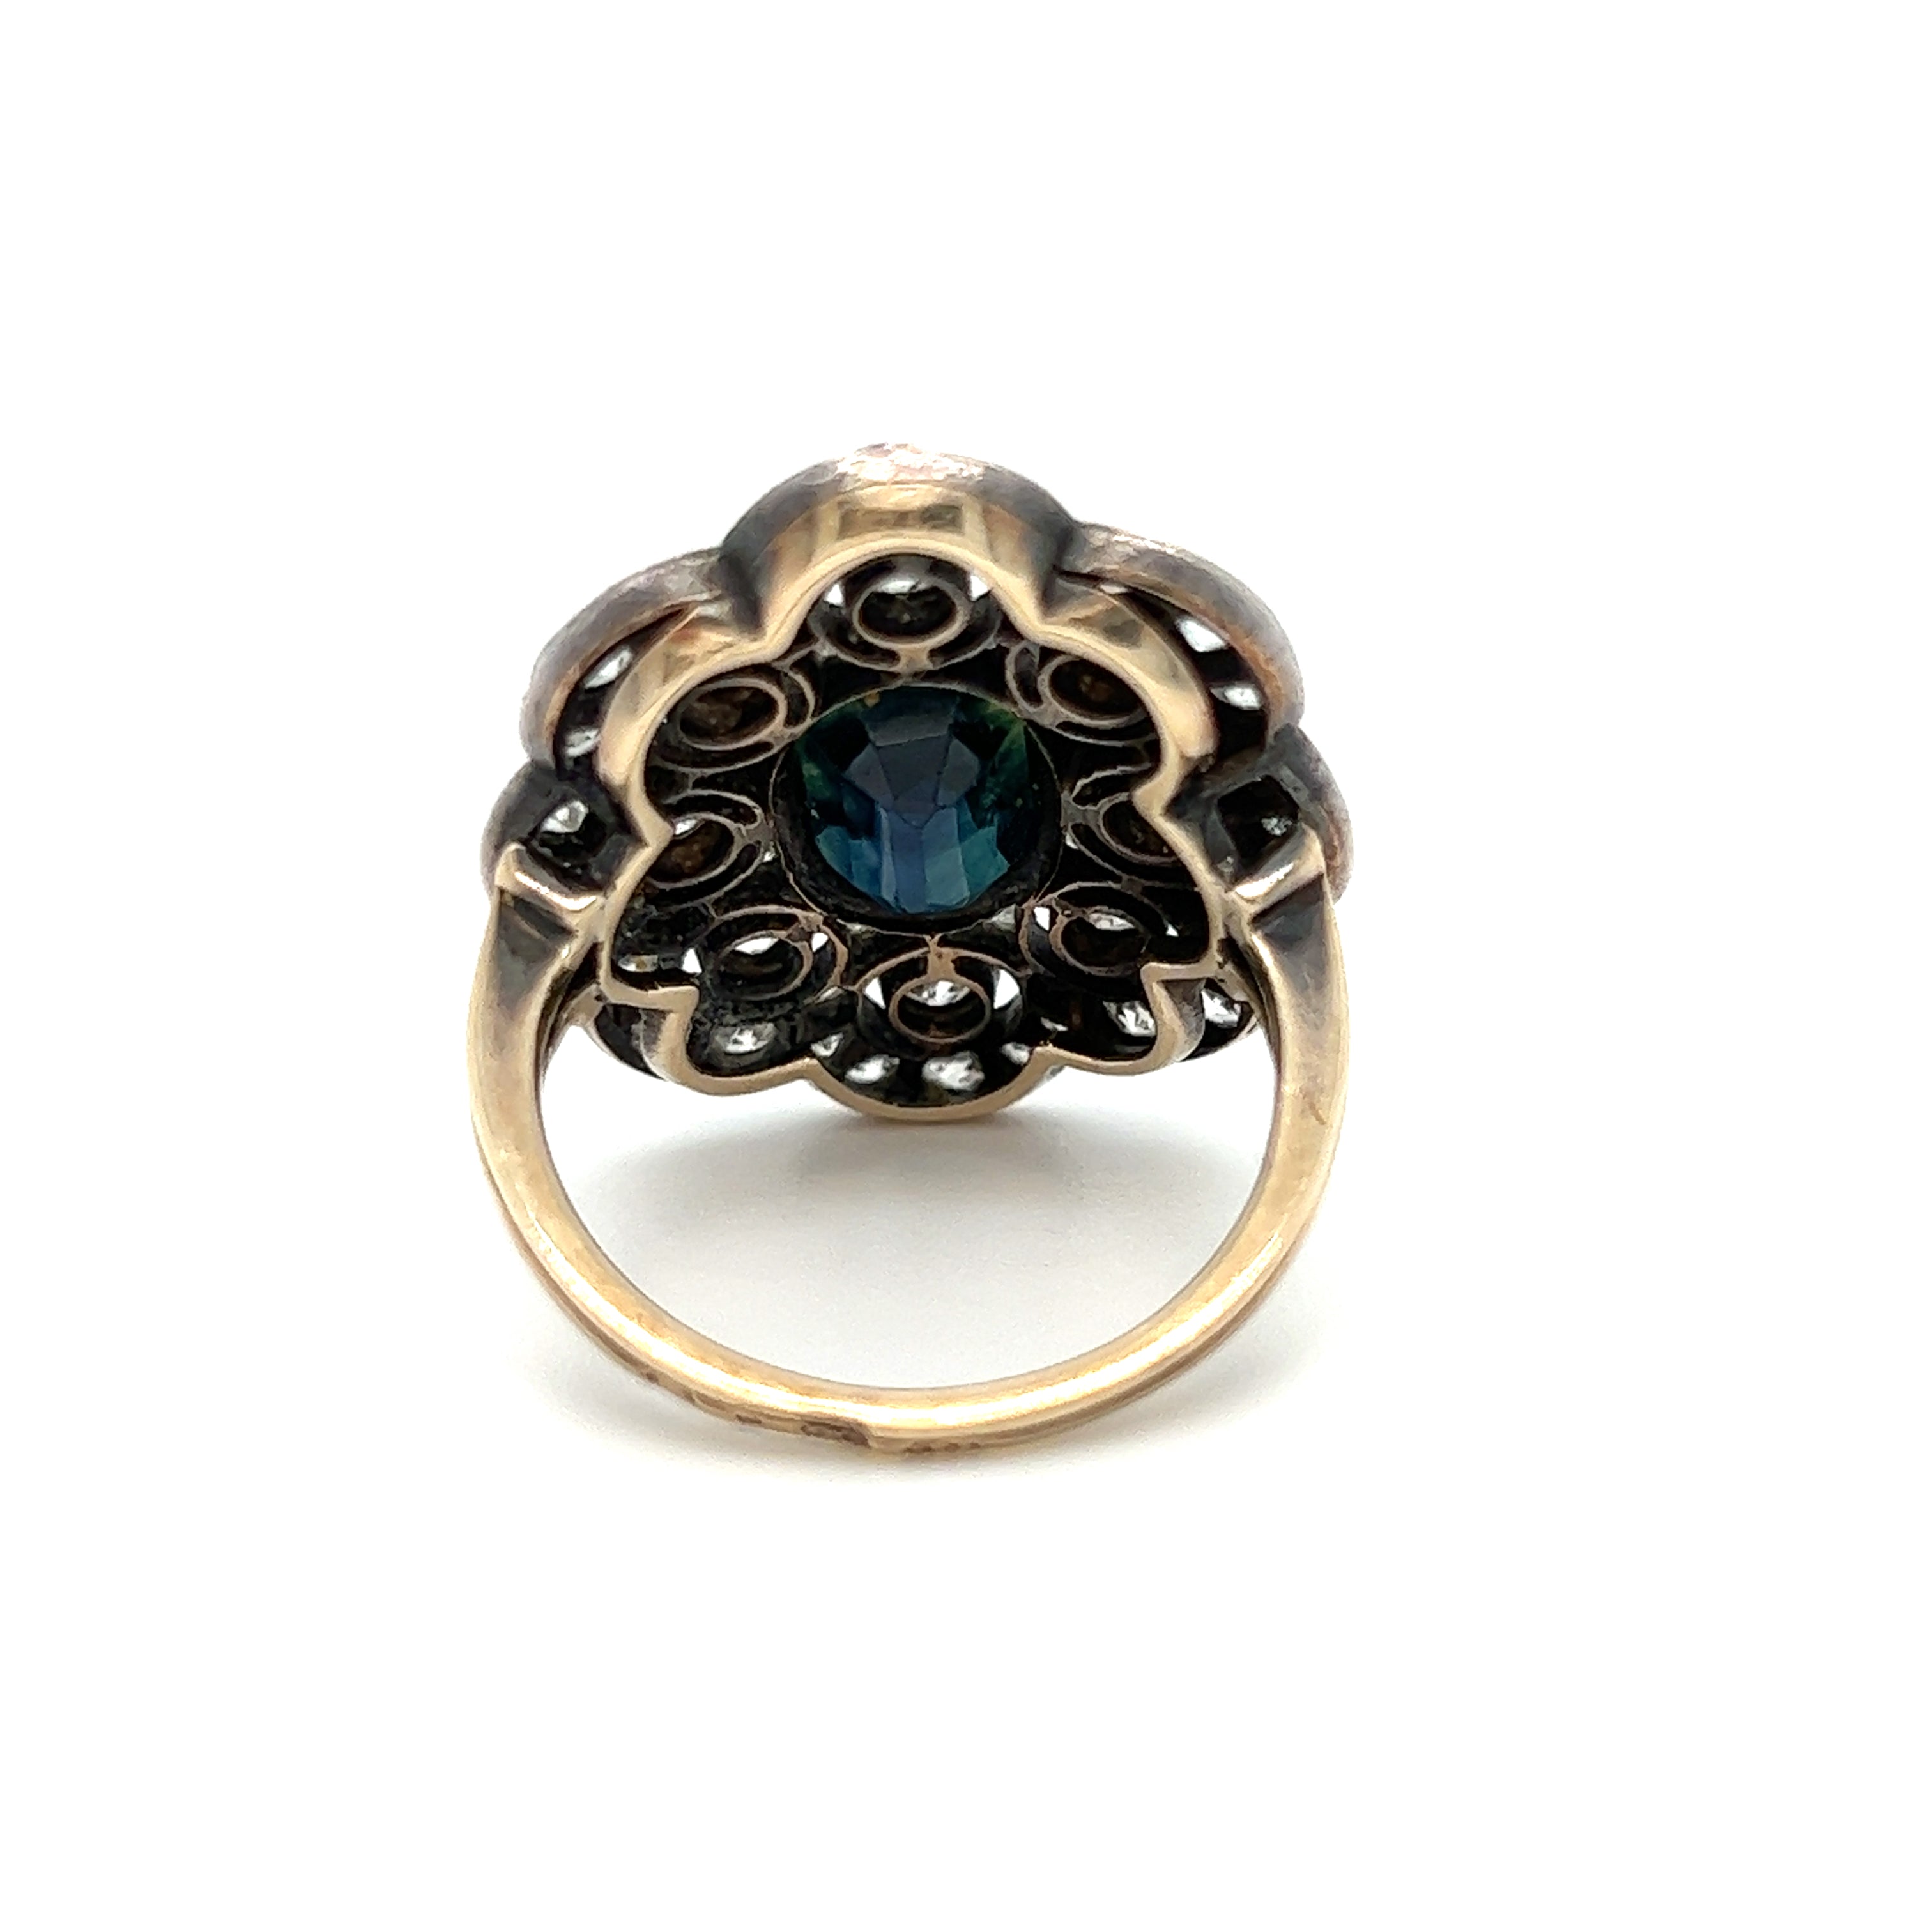 Gorgeous Antique Russian 14K Yellow Gold Diamond and Teal Sapphire Ring - 5.25ct